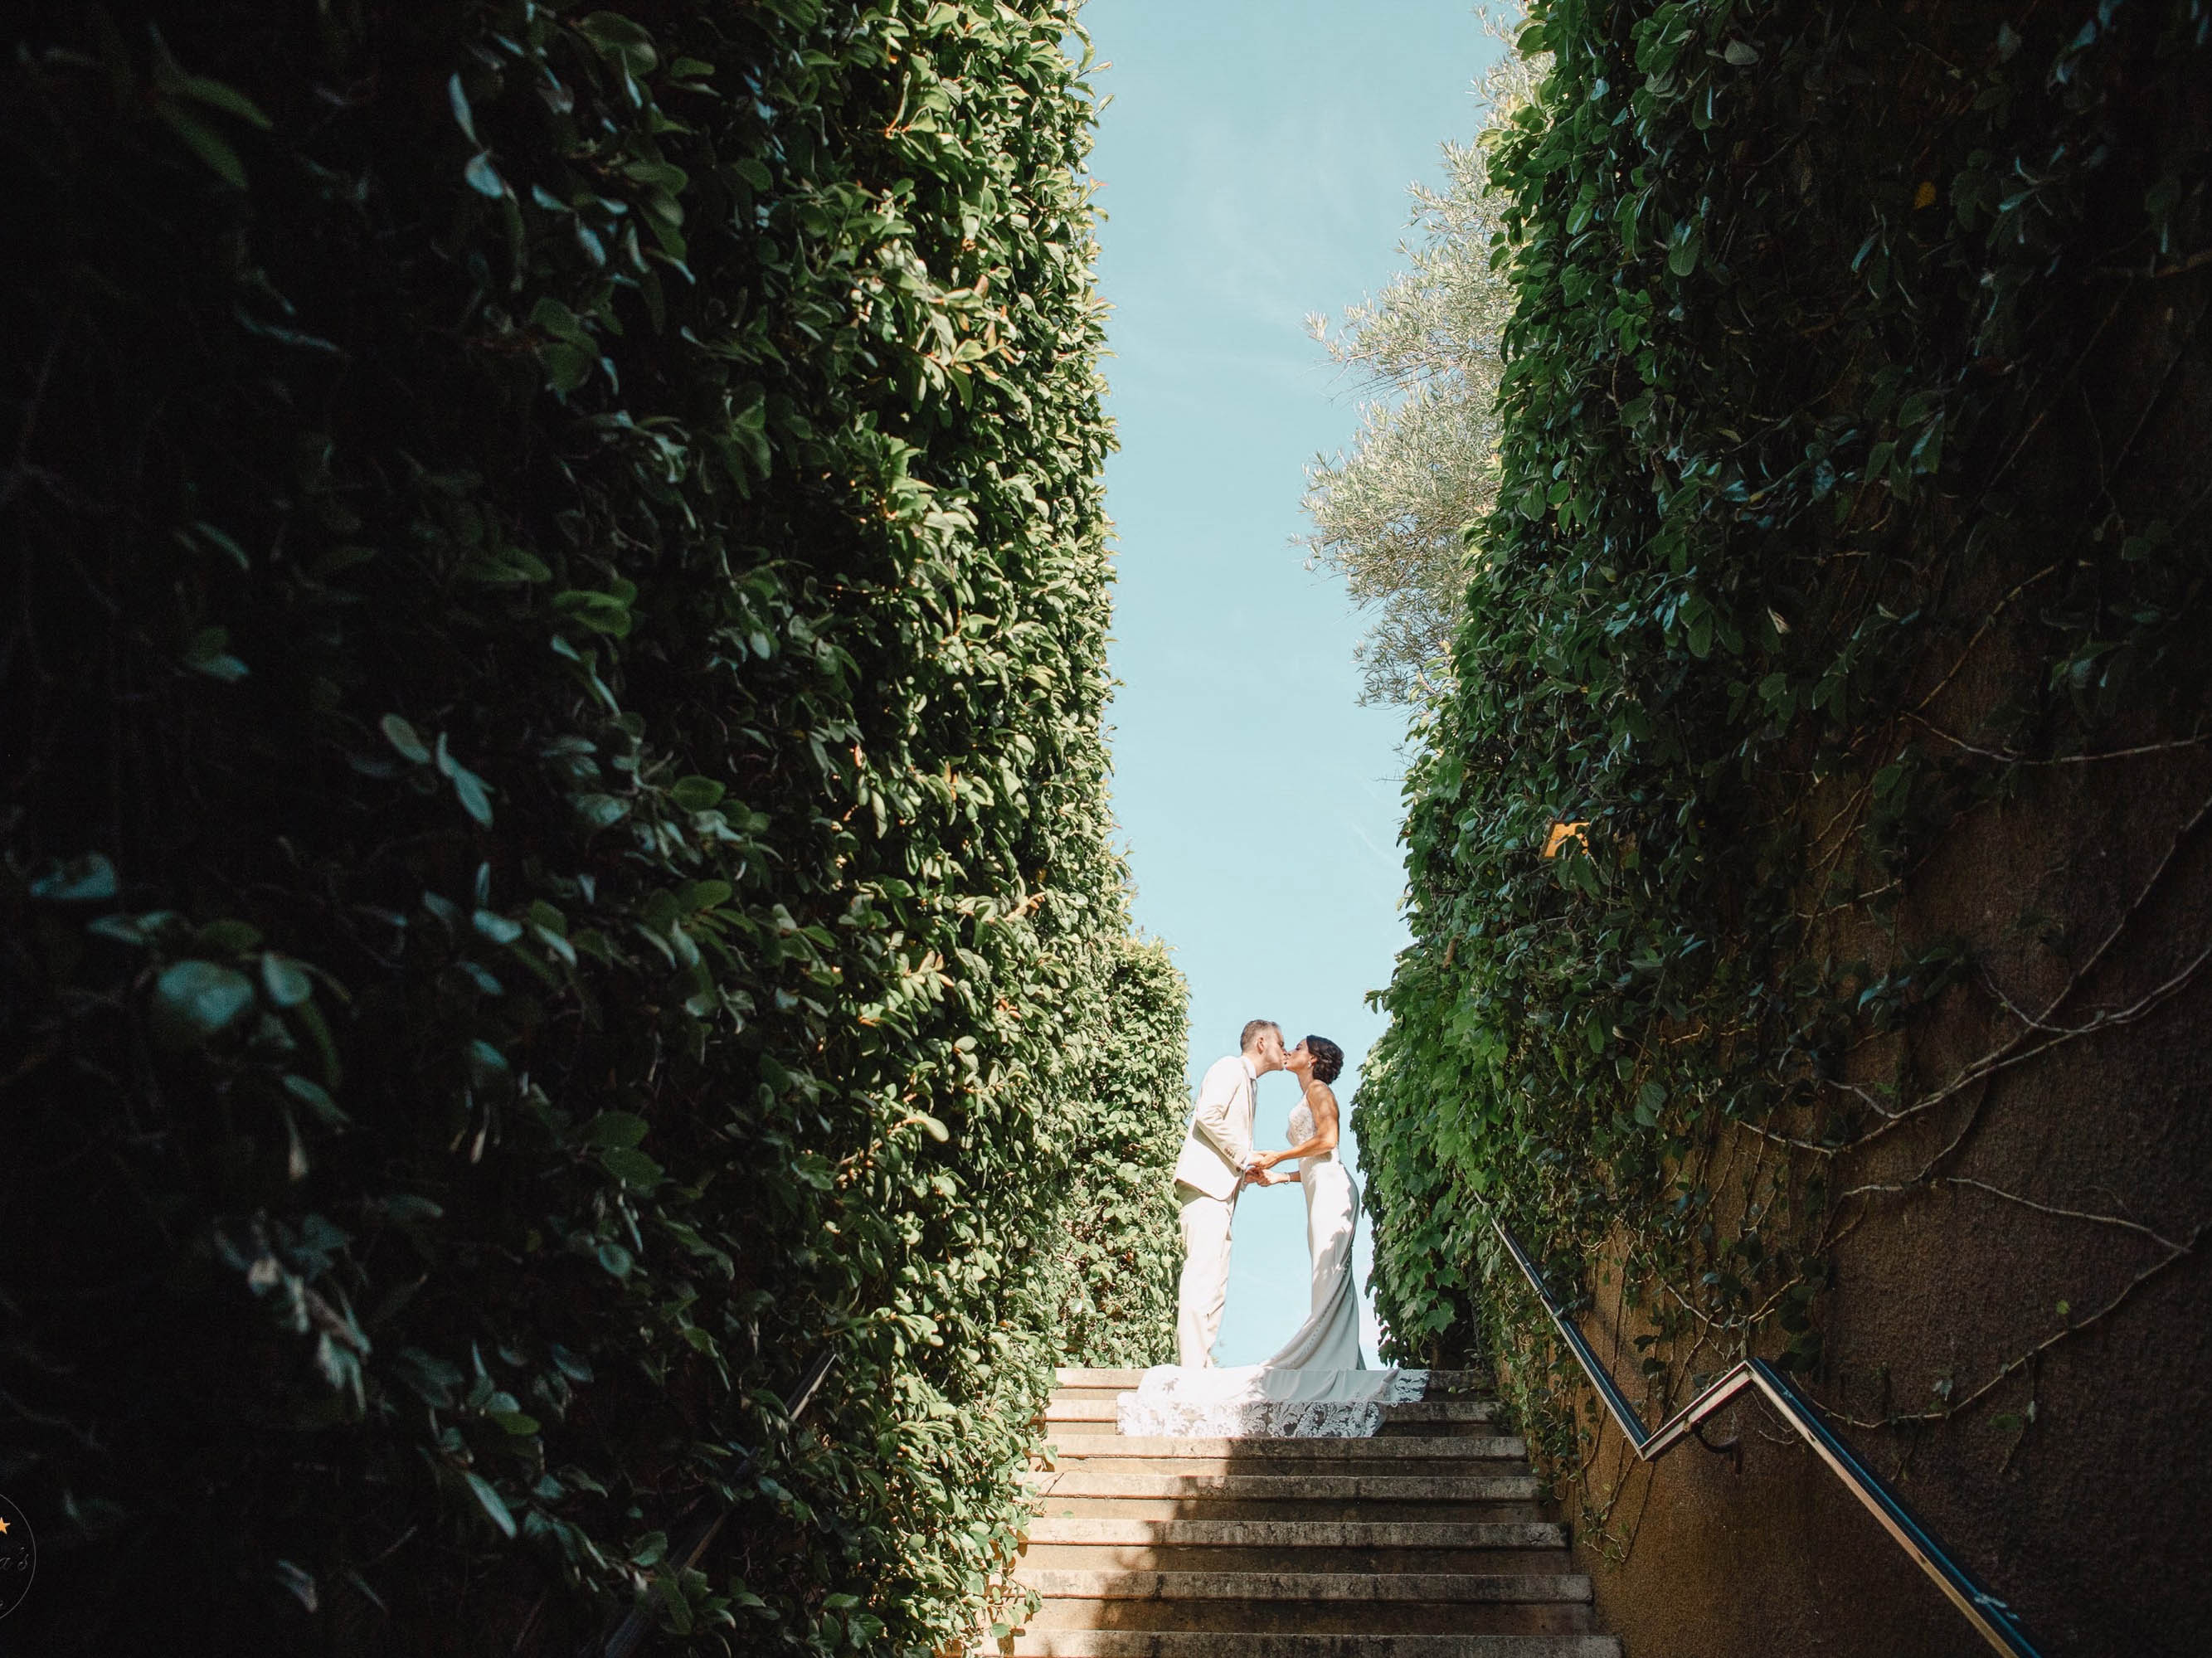 A bride and groom standing on the steps of a garden.